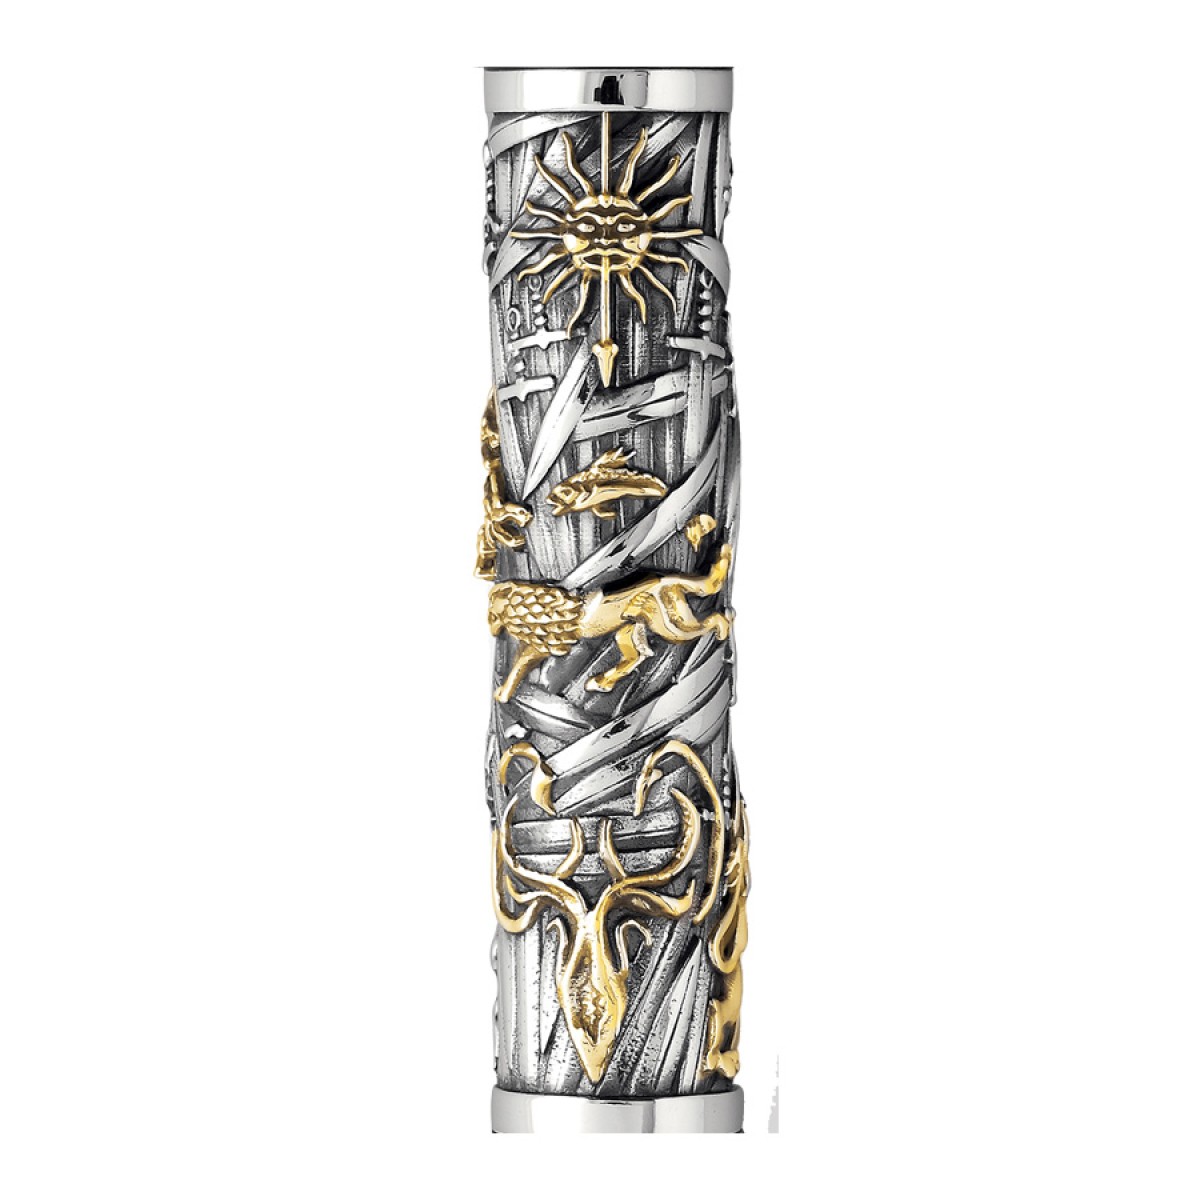 Montegrappa - The Game Of Thrones Limited Edition - Roller Argento